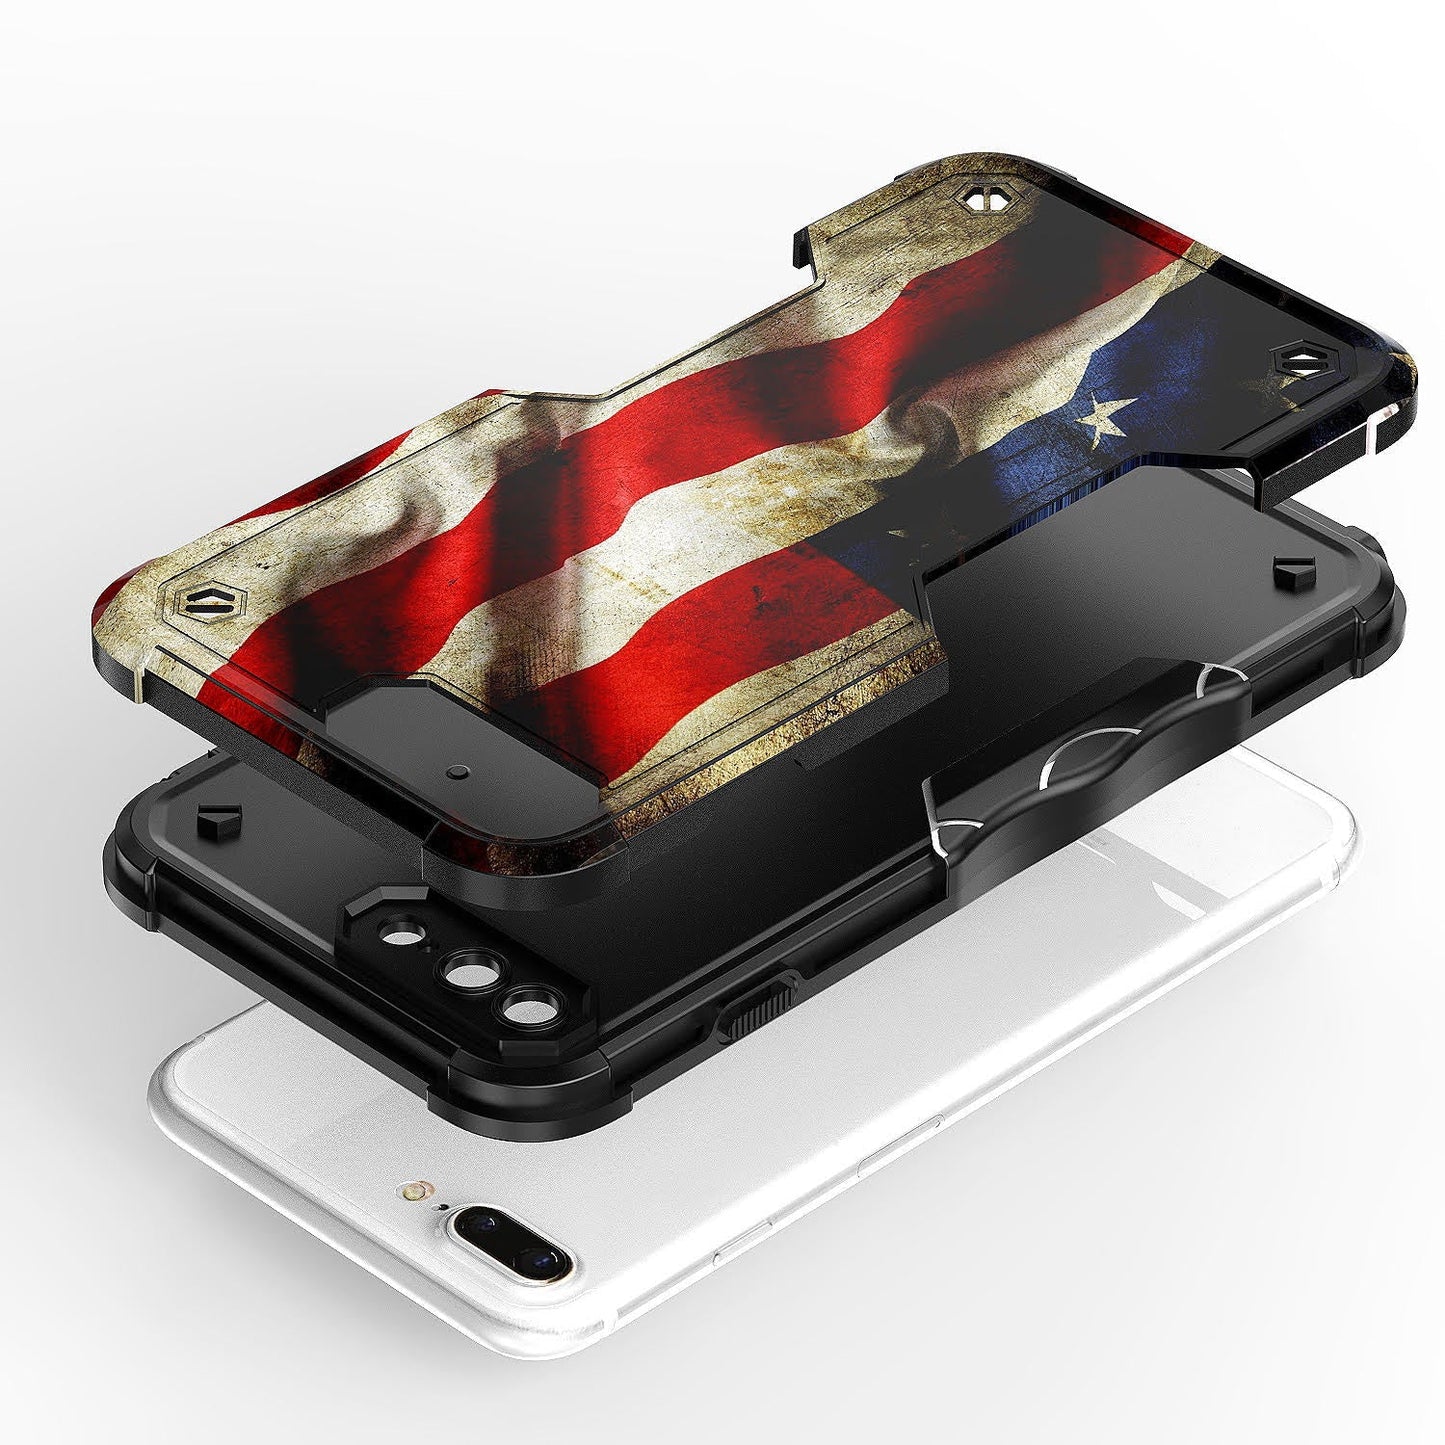 Case For Apple iPhone 7 Plus - Hybrid Grip Design Shockproof Phone Cover - American Flag